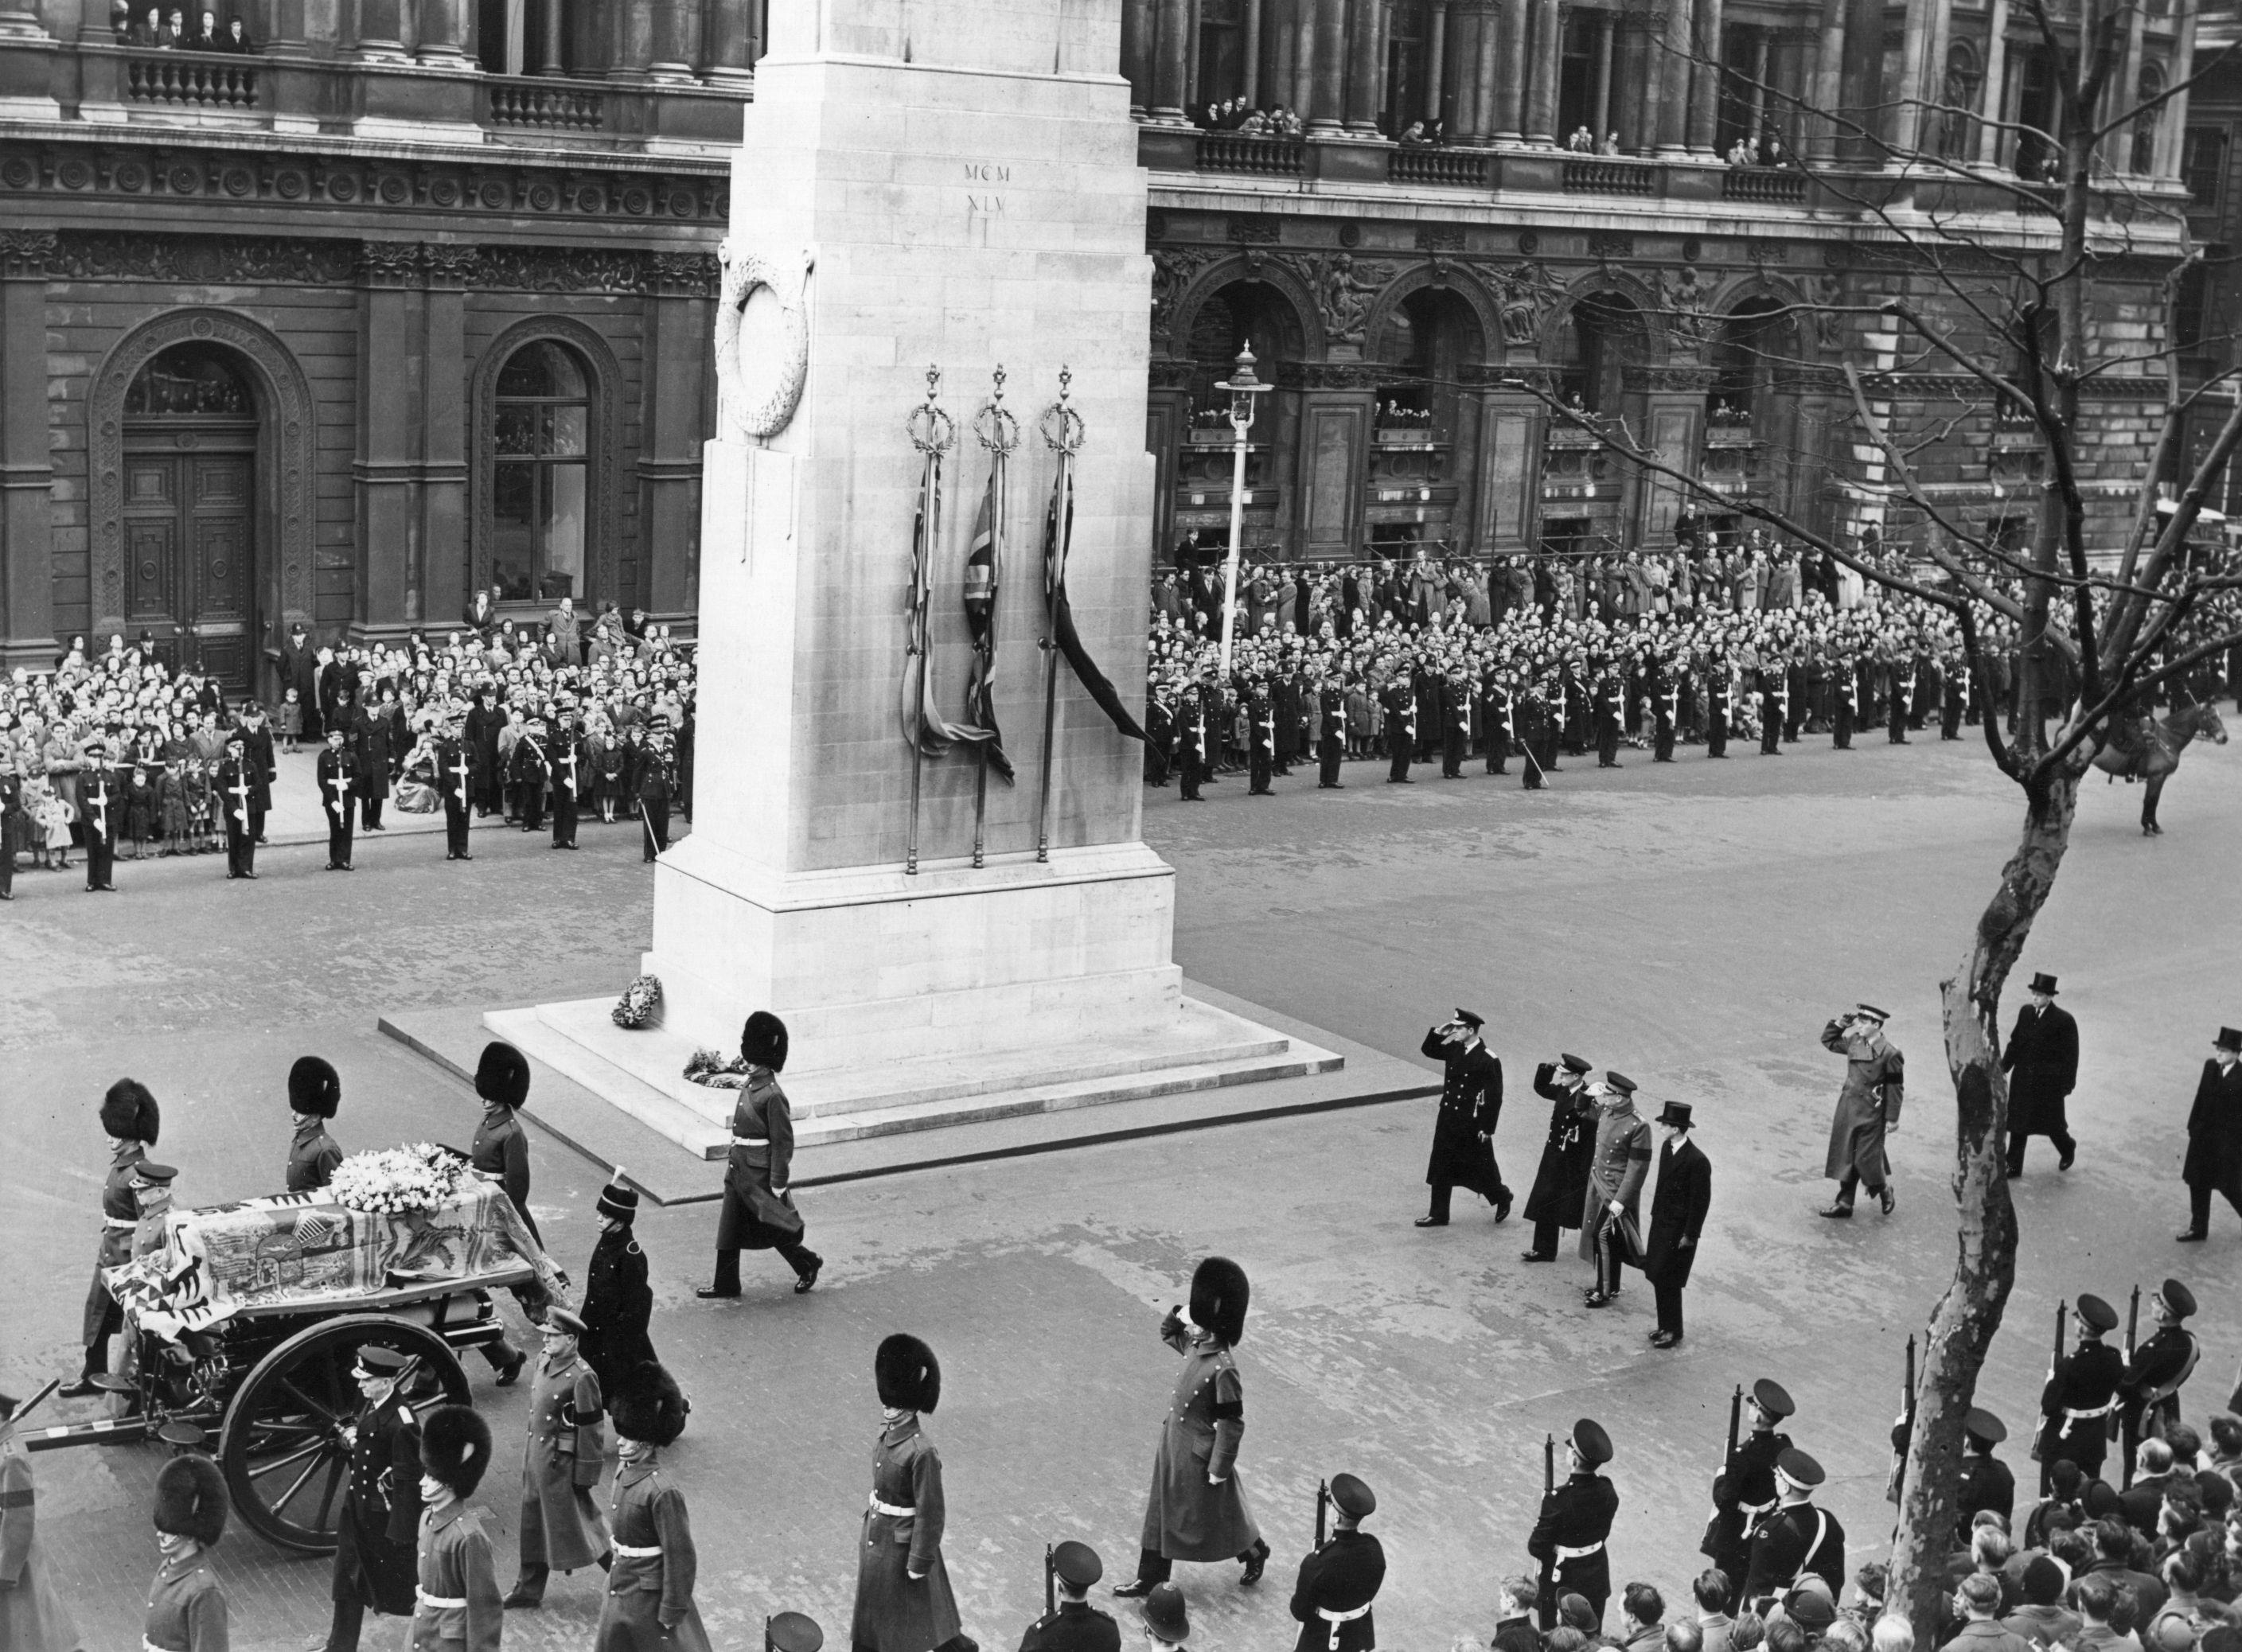 <p>The funeral cortege of Queen Mary made its way through London past the Cenotaph on March 29, 1953.</p>